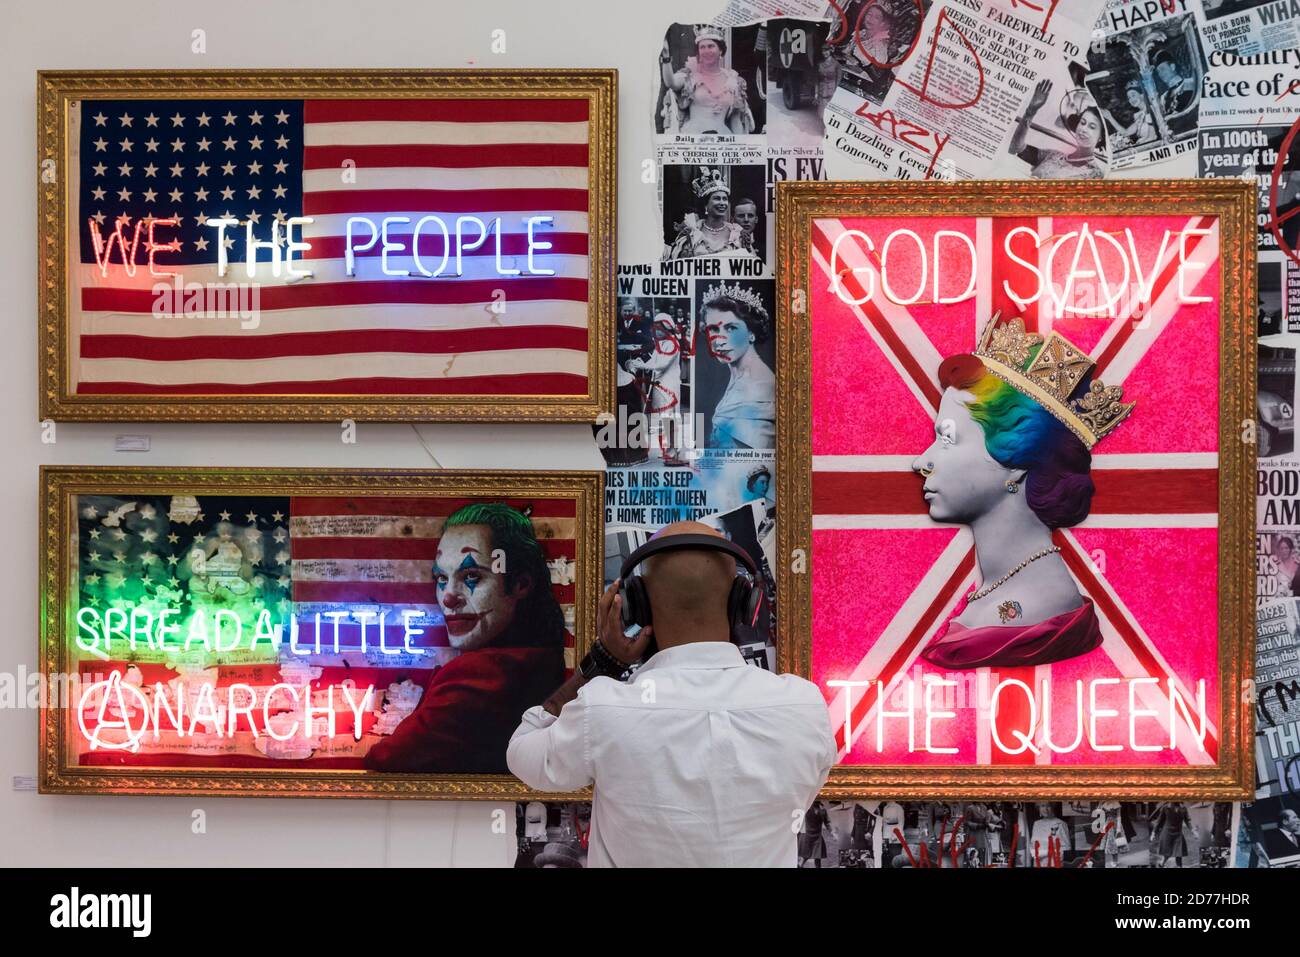 London, UK.  21 October 2020. A visitor views 'Rainbow Punk Queen (Neon)', 2020, 'Spread a Little Anarchy (Joker Neon)', 2020, and 'We The People', 2020, all by Mark Illuminati. Preview of STARTnet Art Fair at the Saatchi Gallery in Chelsea.  The contemporary art fair showcases local London, as well as international, galleries and individual artists from all over the world.  The fair runs 21 to 25 October with Covid-19 protocols in place for visitors.  Credit: Stephen Chung / Alamy Live News Stock Photo